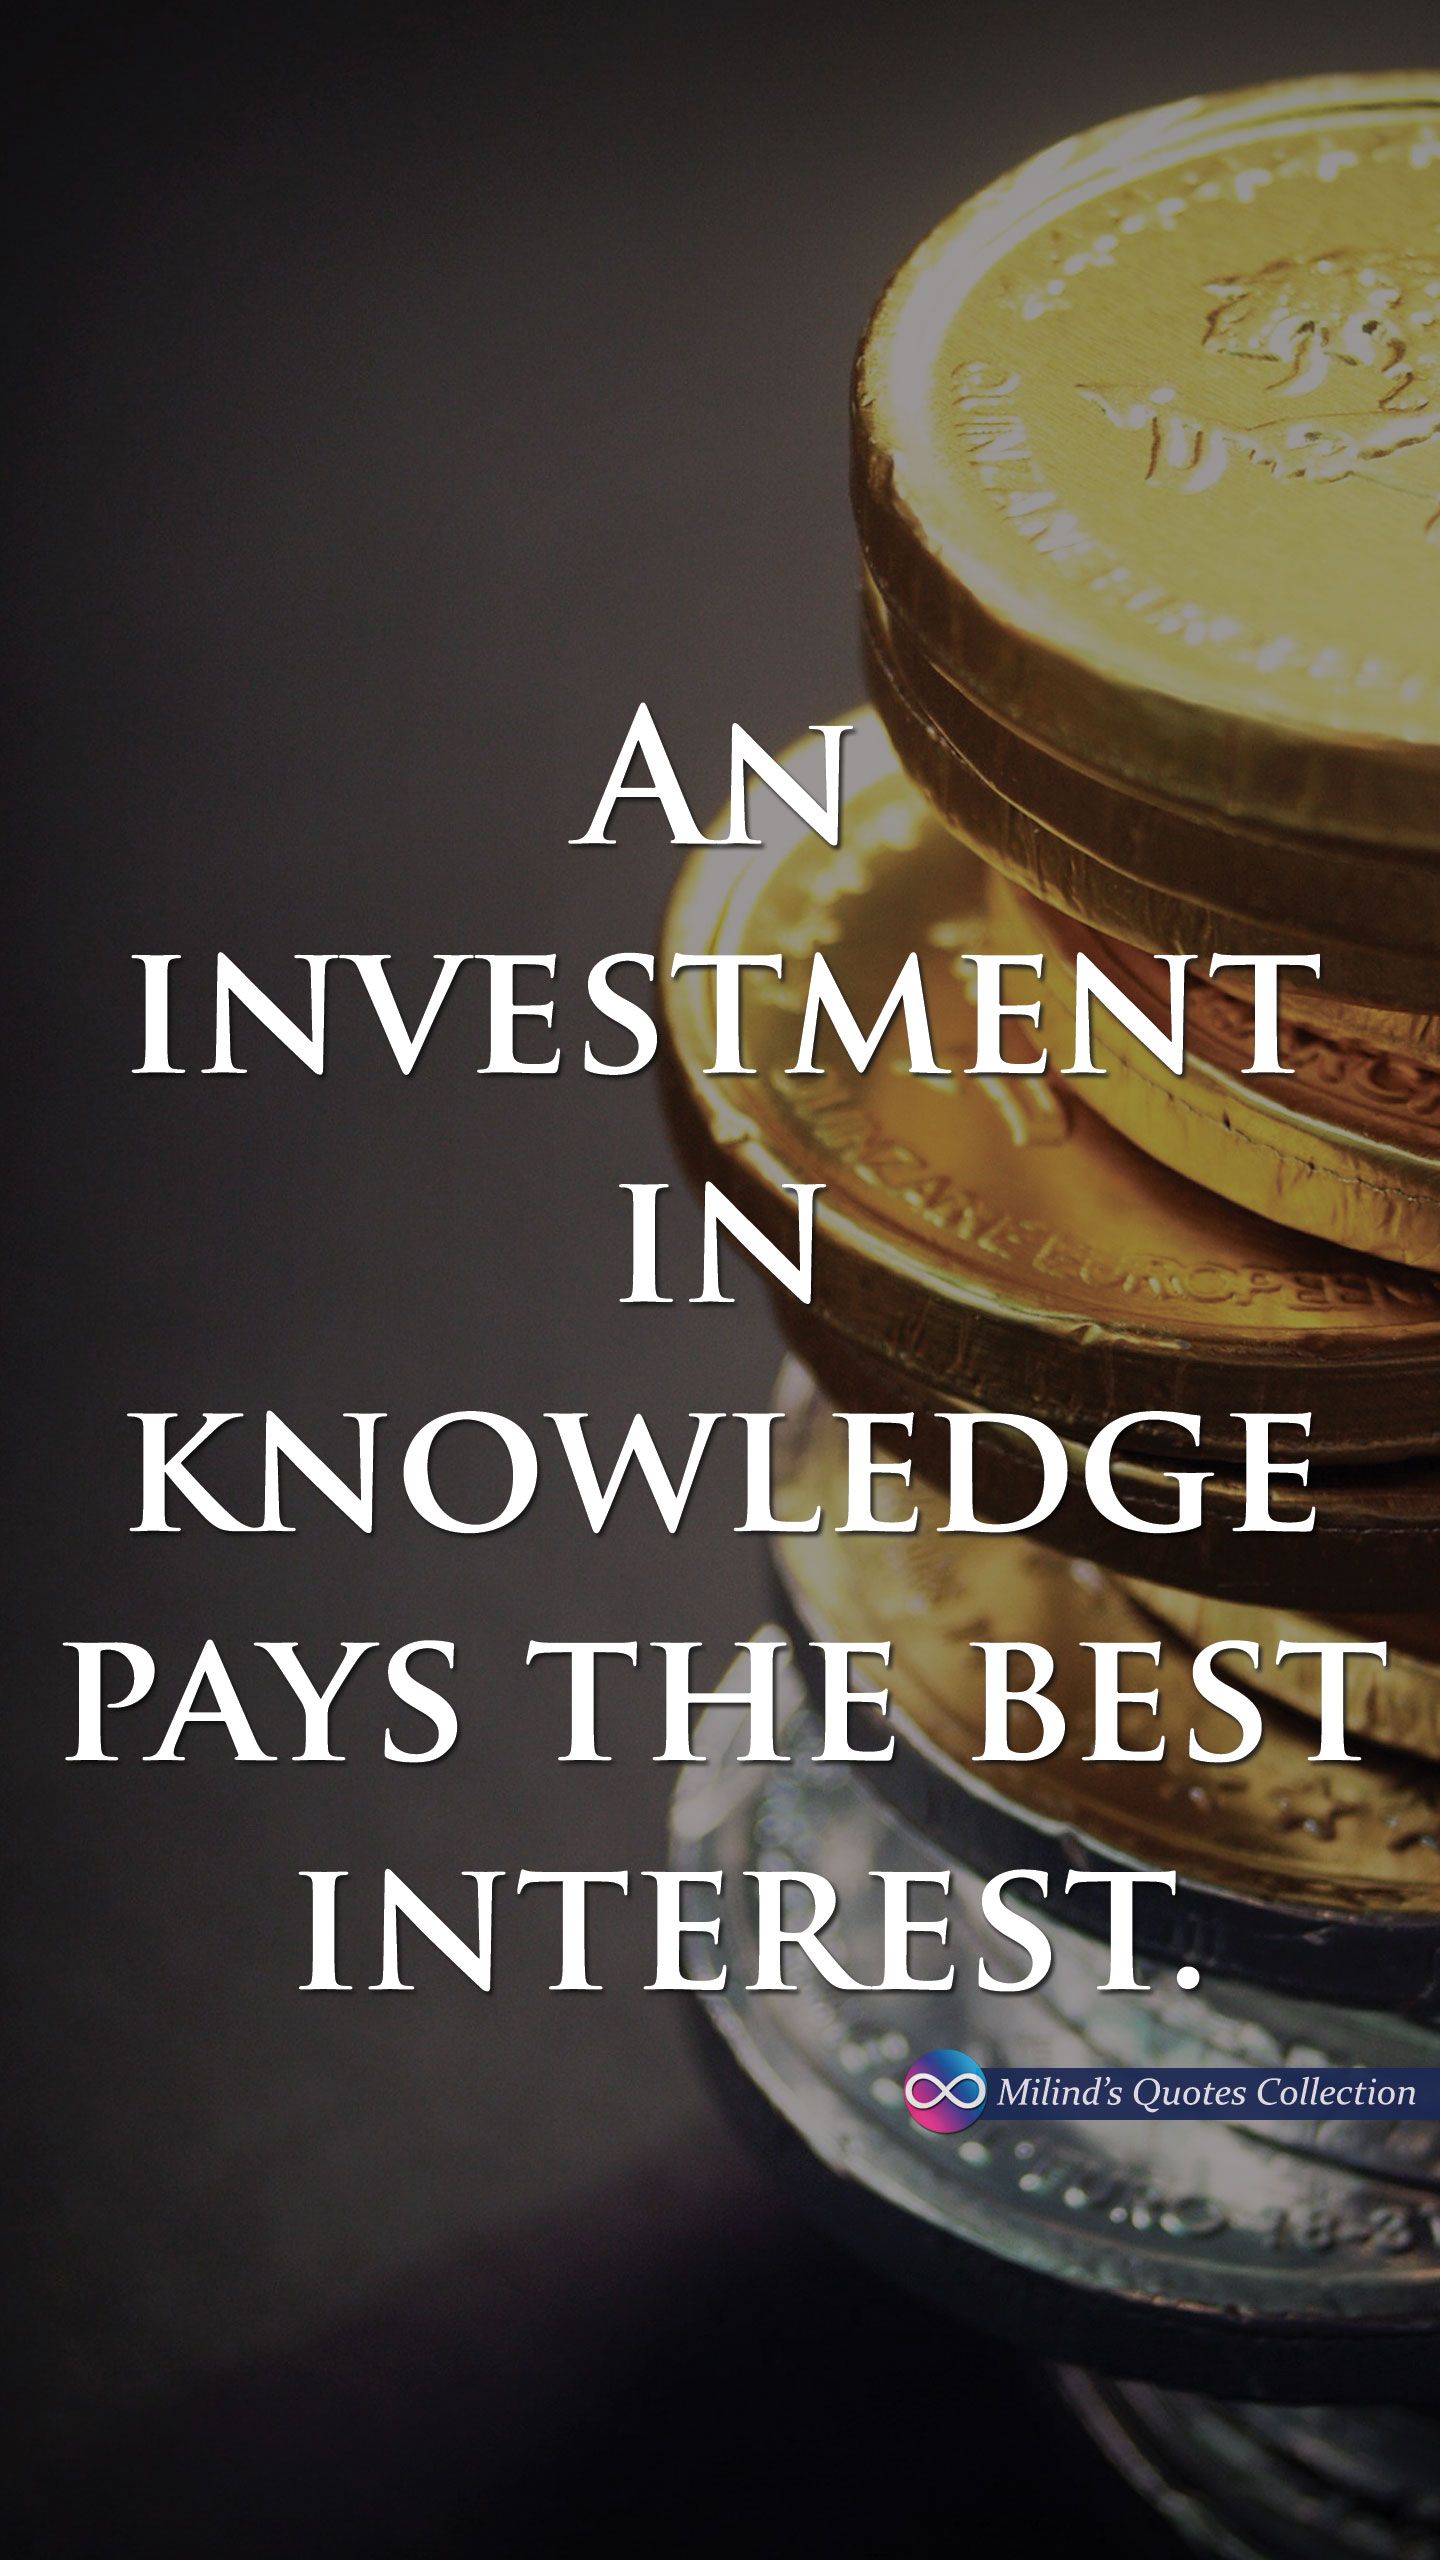 An #investment in #knowledge pays the #best #interest